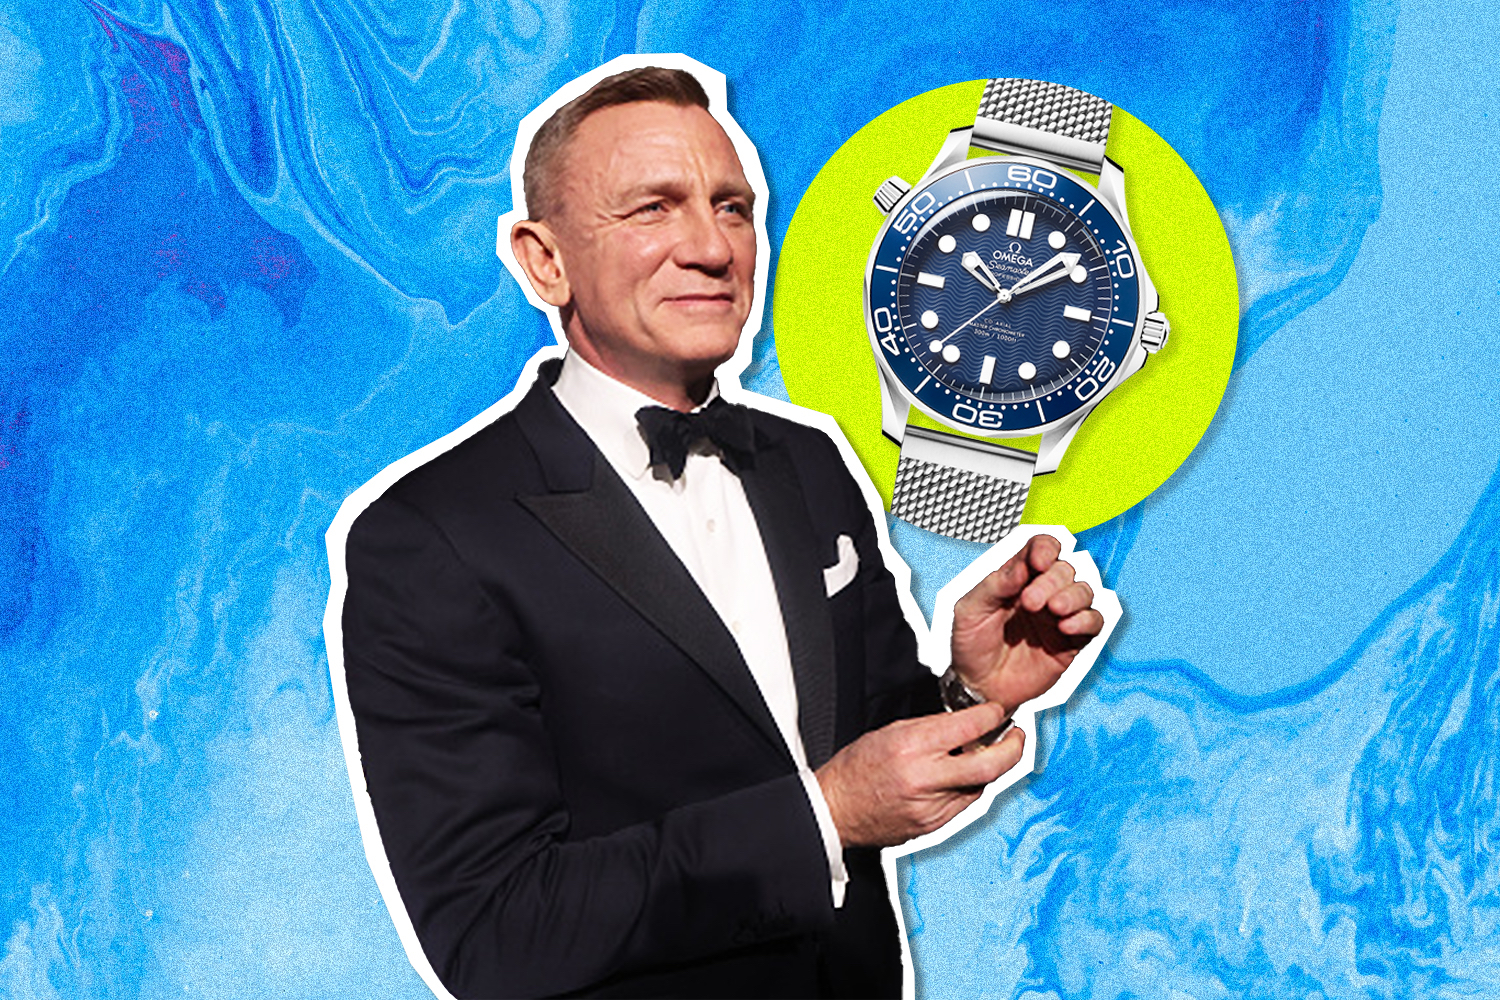 Daniel Craig Isn’t James Bond Anymore… But He’s Still Wearing Insanely Cool Watches